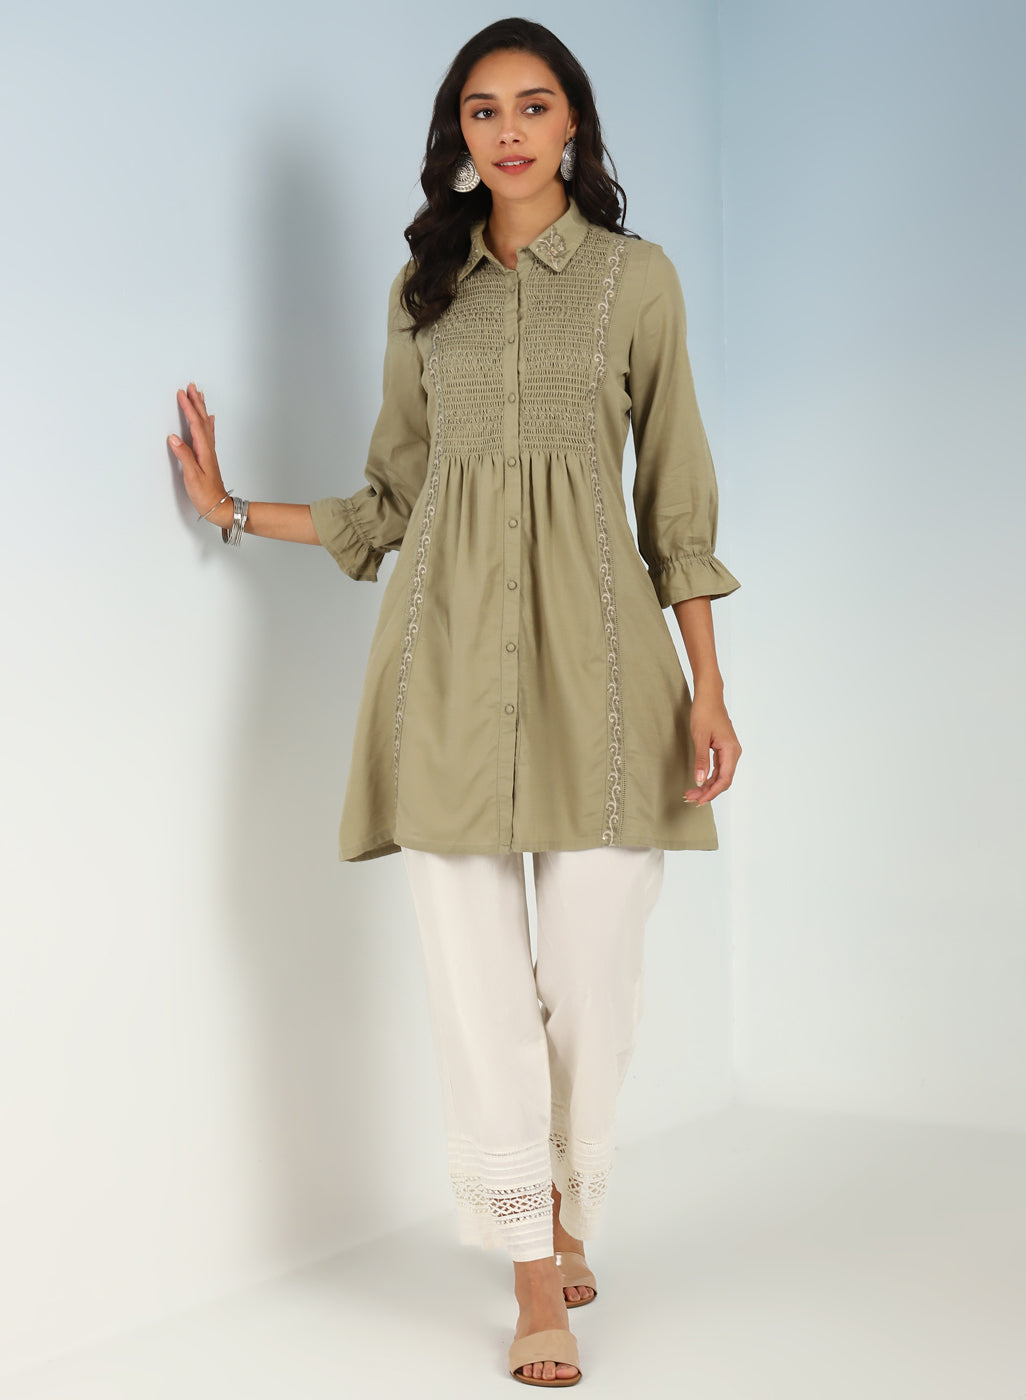 – with Sleeve-23AWLK03024-3 Tunic Green A Embroidery Rayon effect Smocking Lakshita Puffed and line